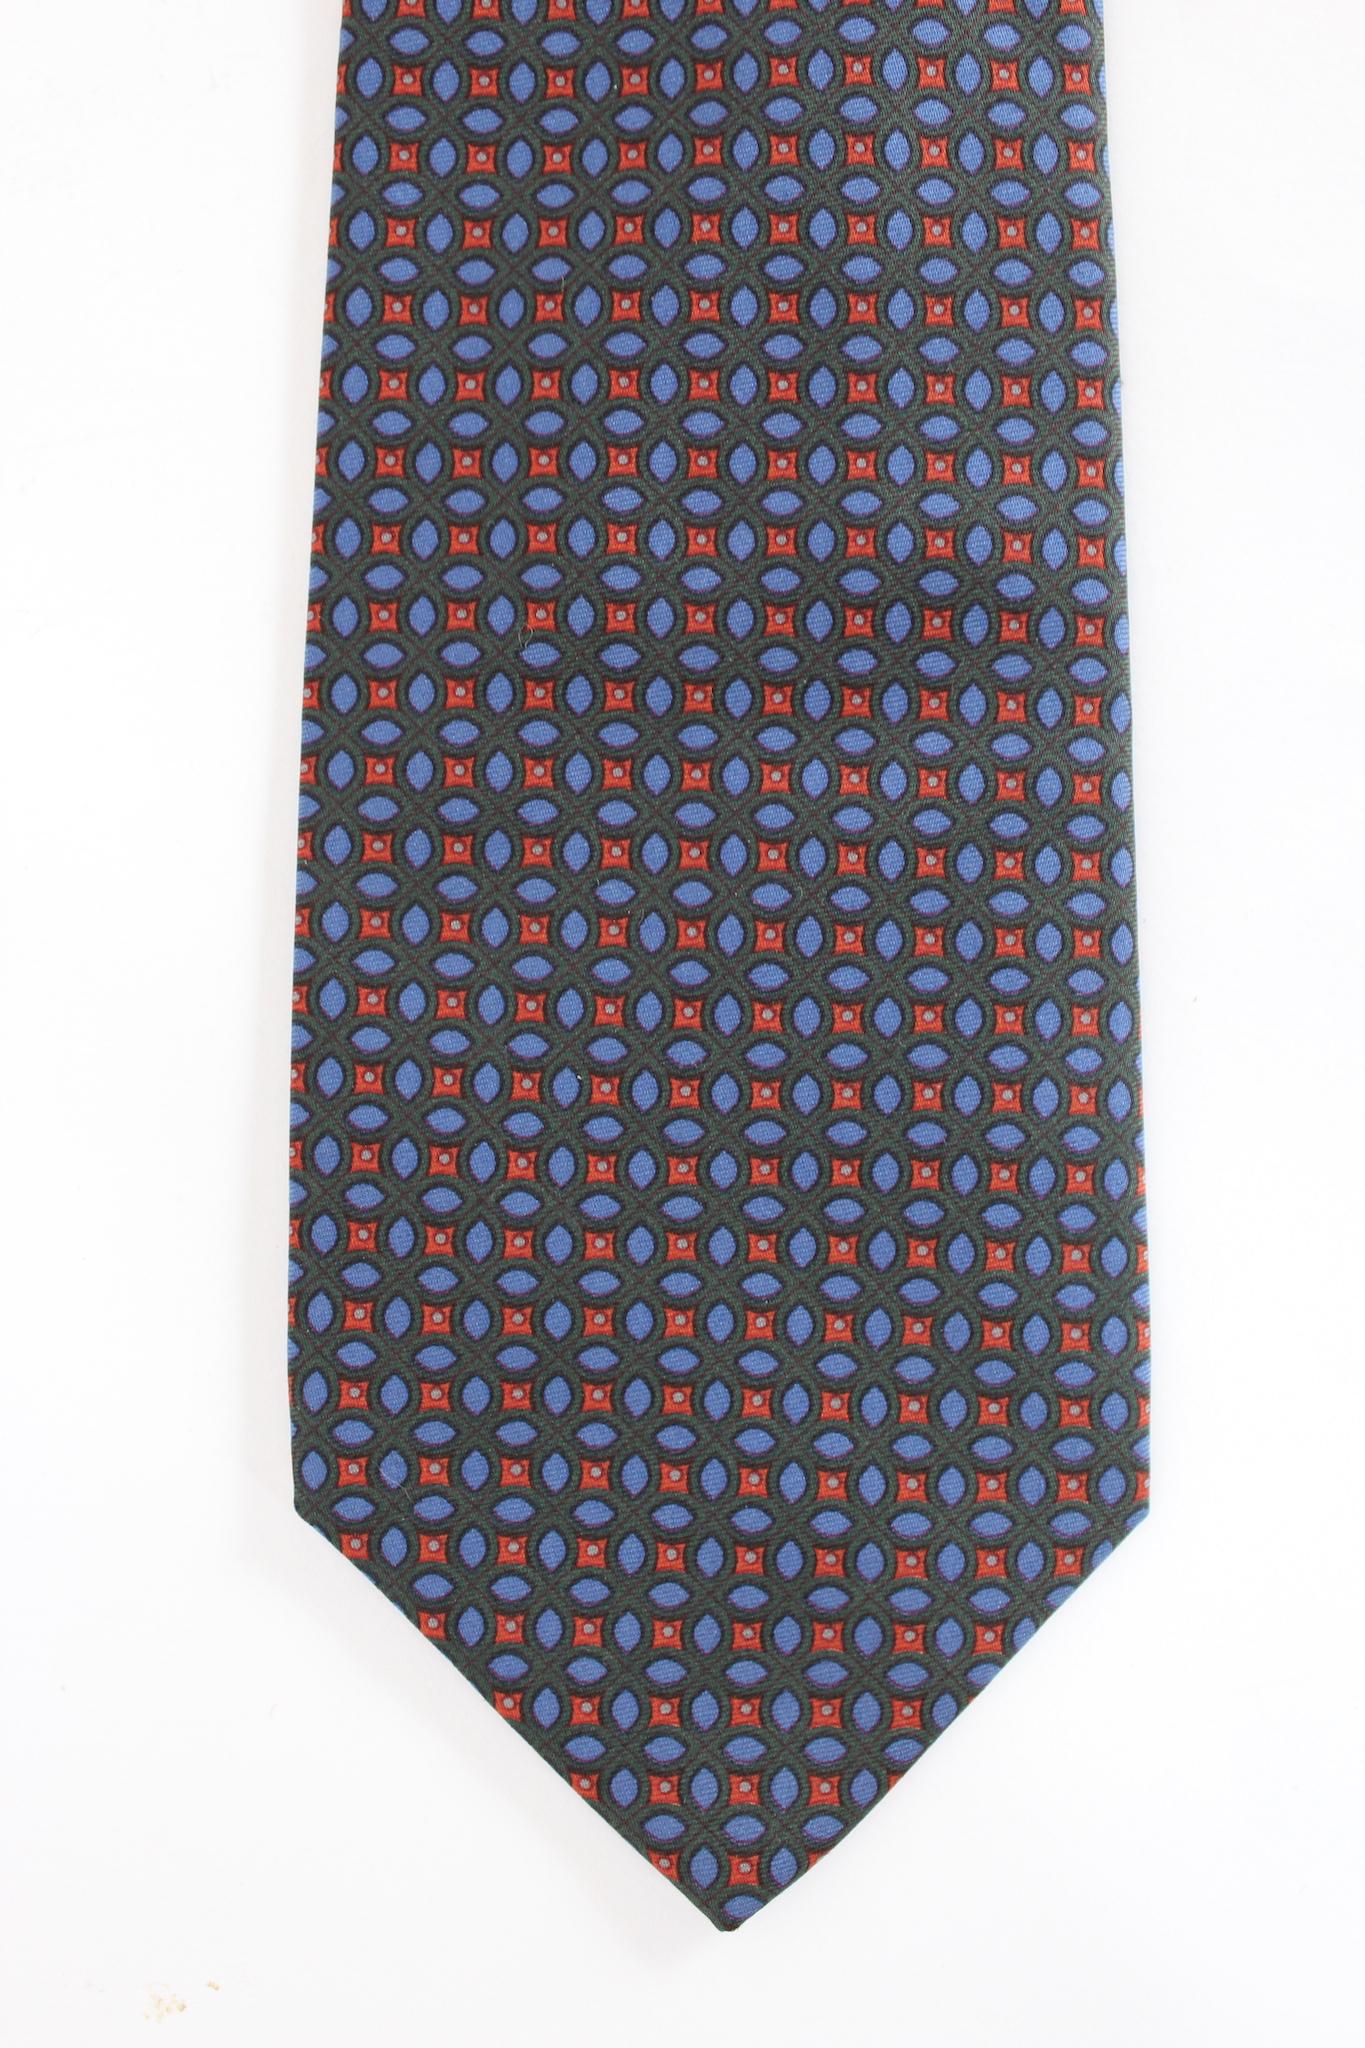 Etro 90s vintage classic tie. Green, blue and red color with geometric designs, 100% silk fabric. Made in Italy.

Length: 140 cm
Width: 9 cm